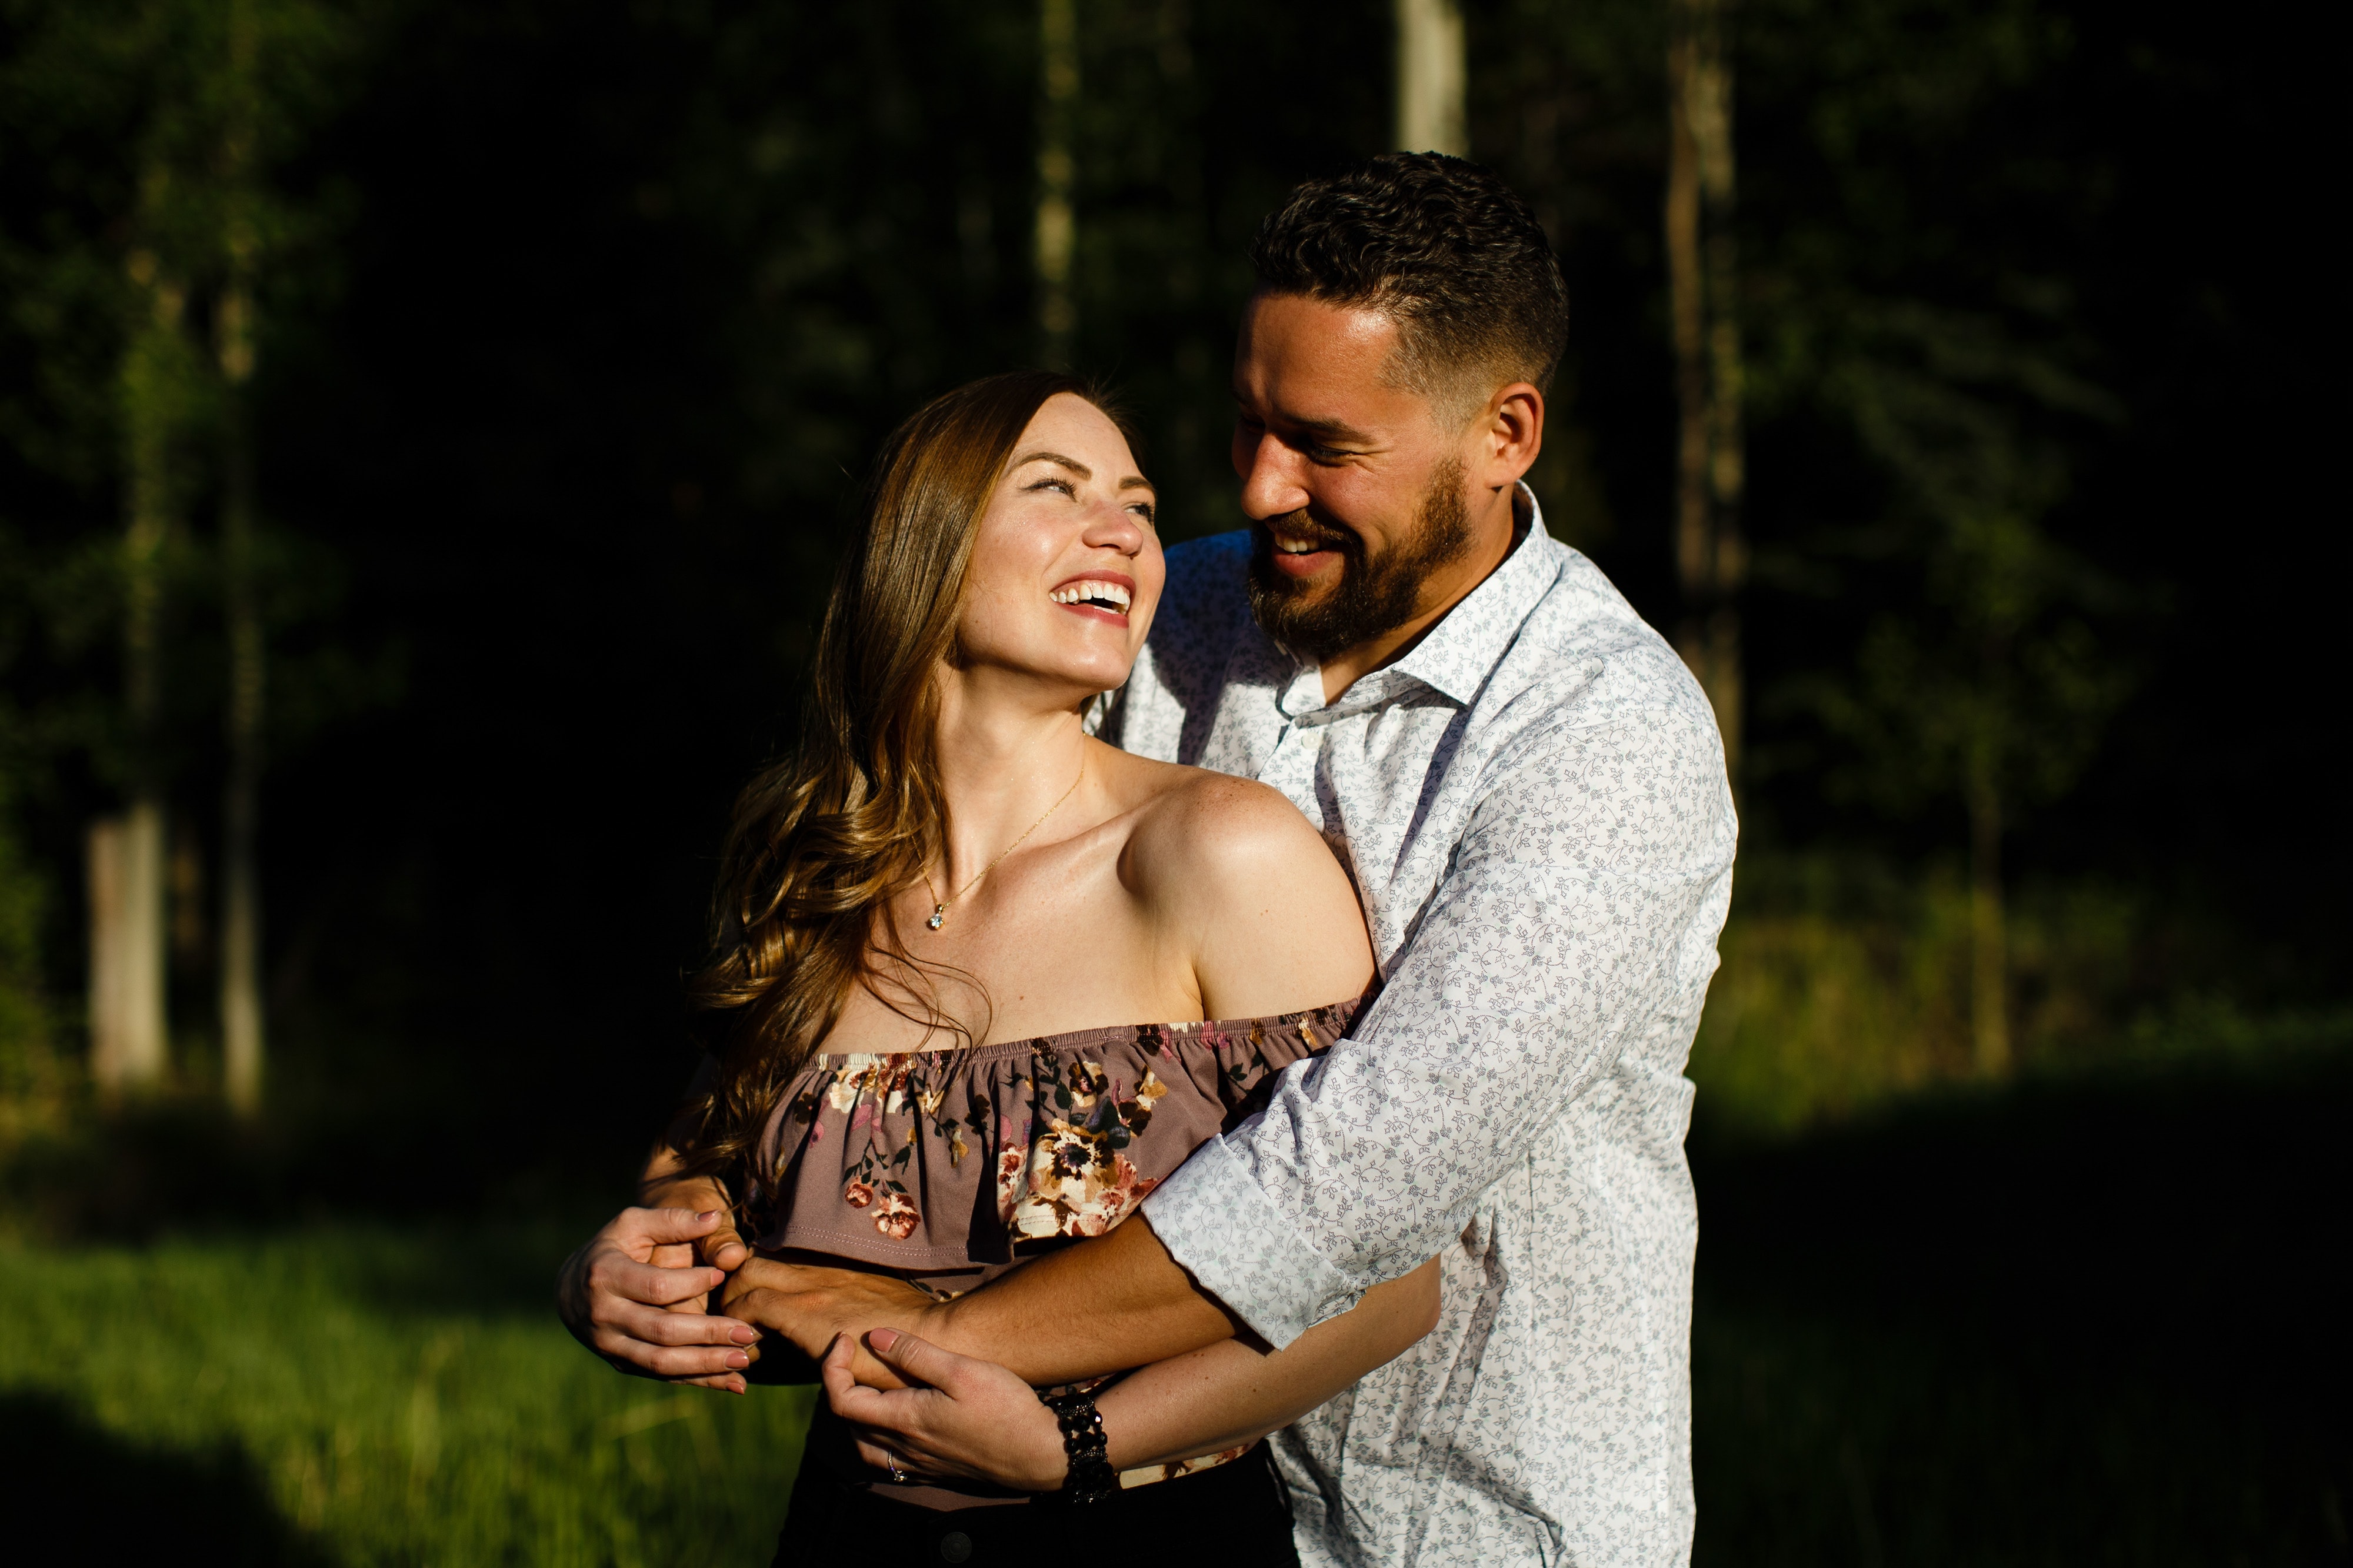 Sharon and Nick share a laugh together during their Golden Colorado engagment session